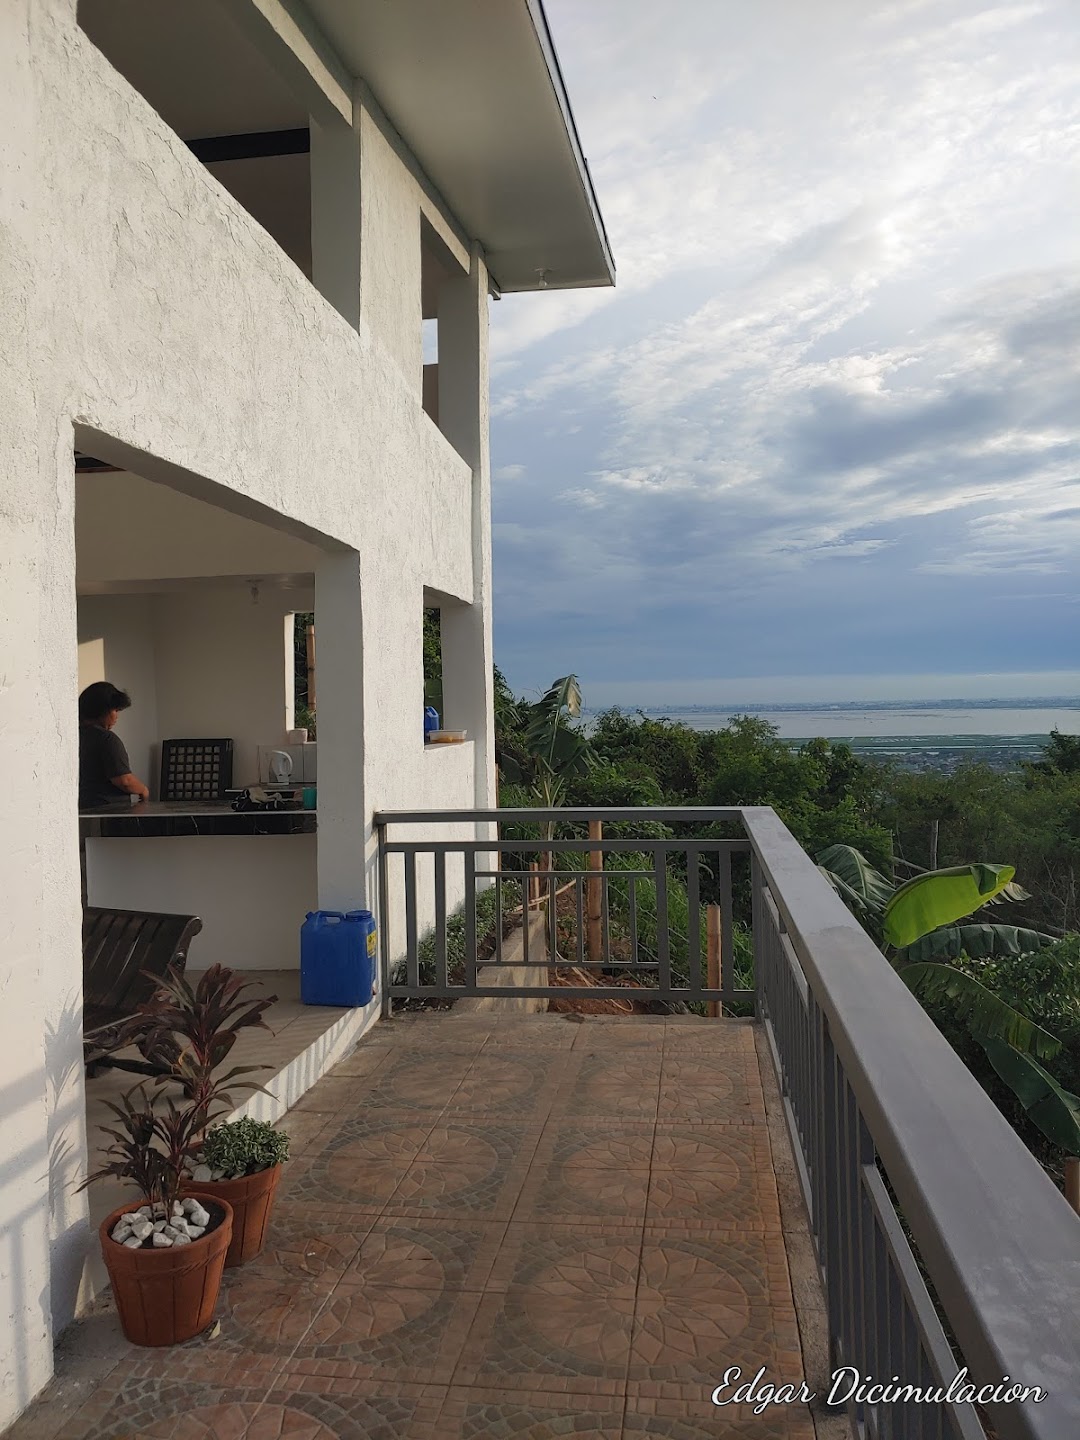 Dicimulacion Staycation House - Lake-City-Mountain View